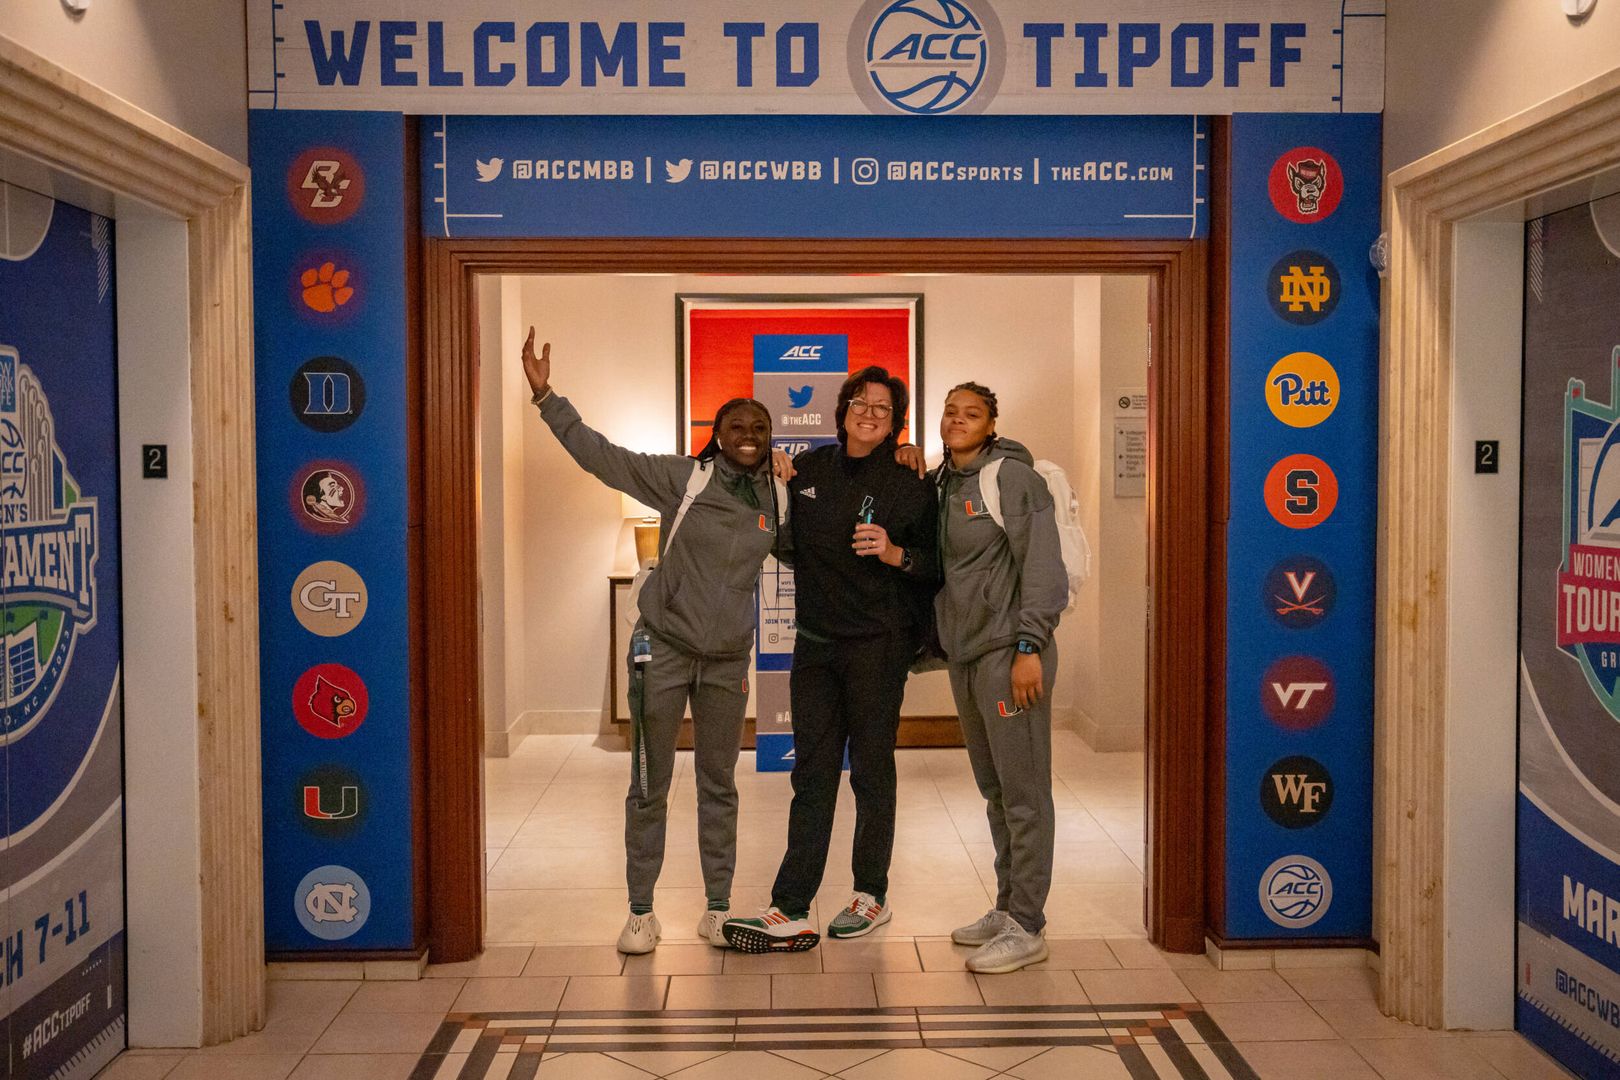 ACC TIPOFF CENTRAL